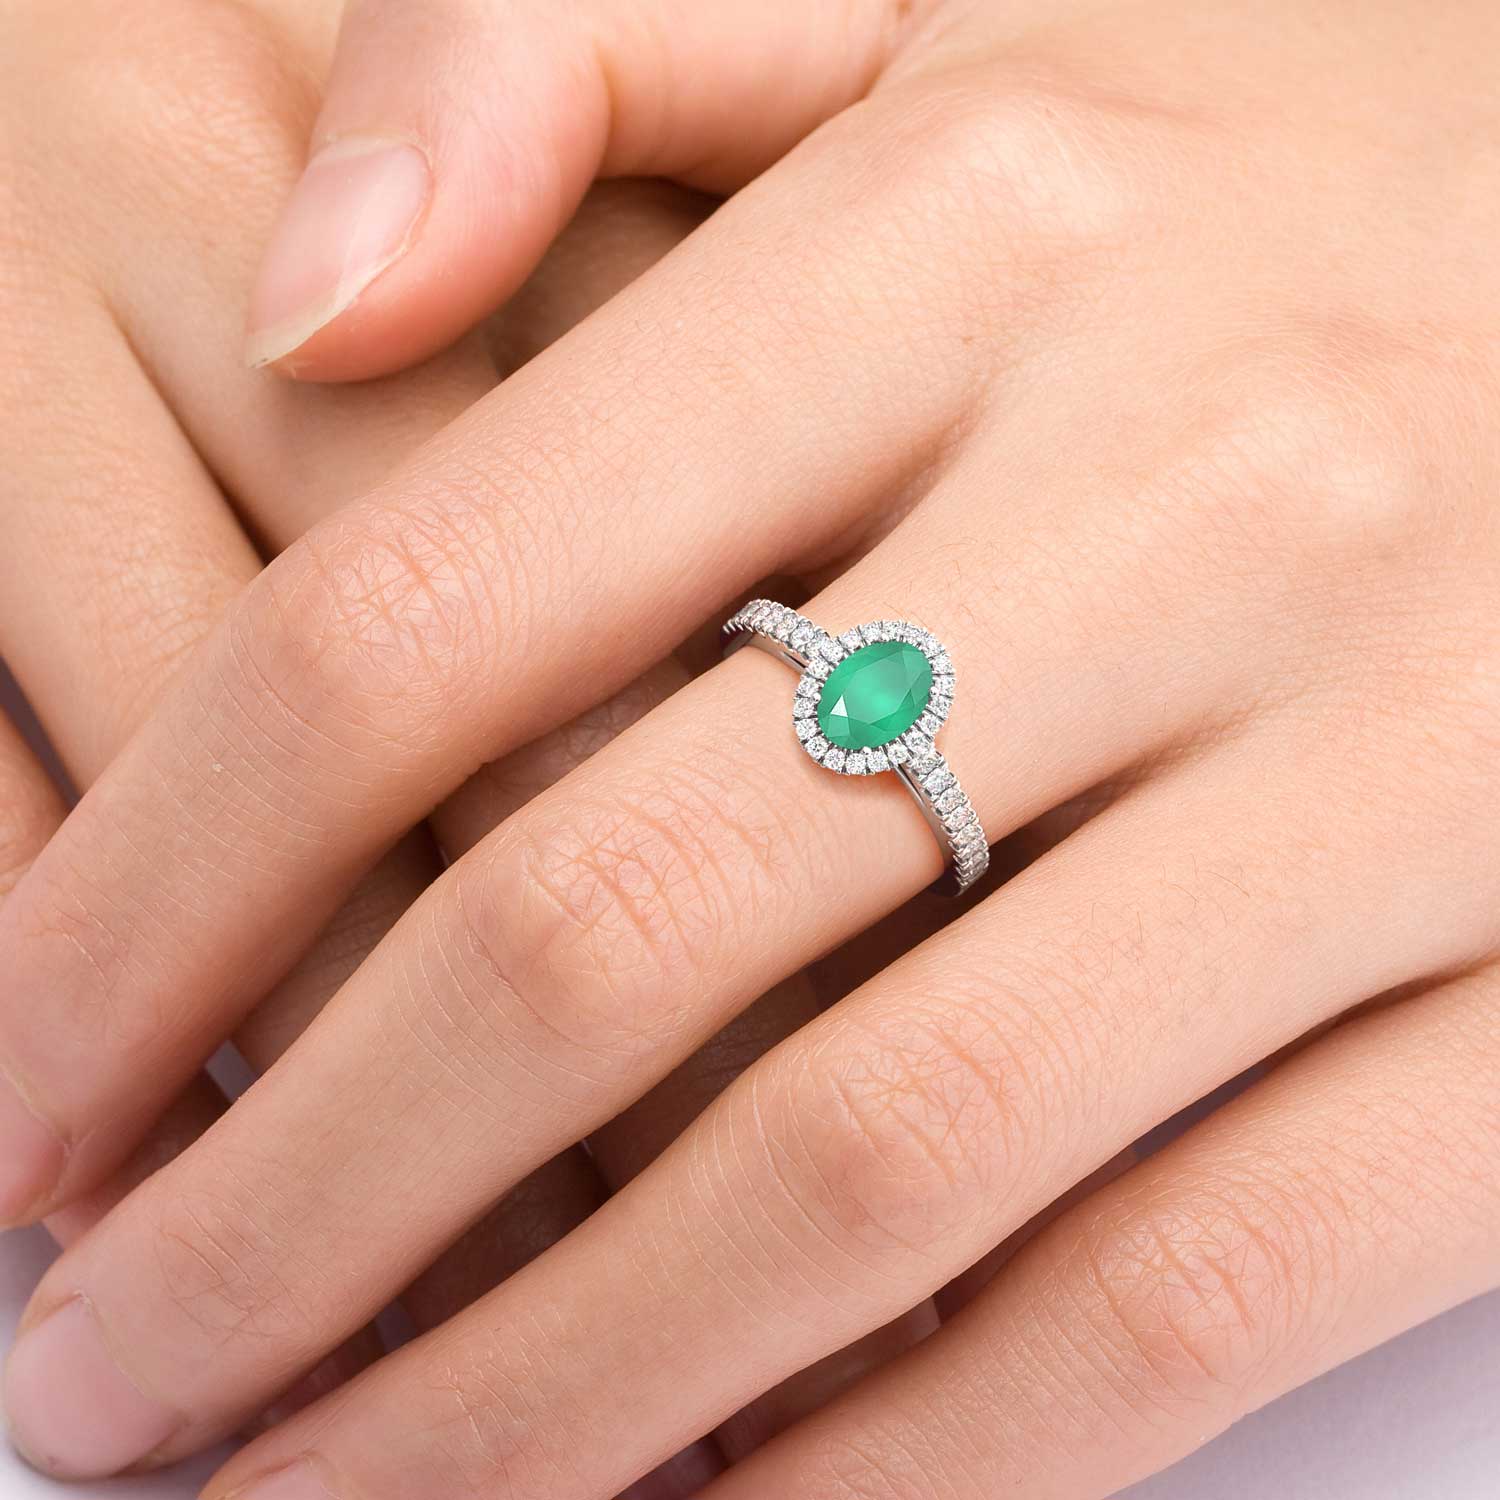 A close-up image of a stunning emerald gemstone ring, featuring a vibrant green emerald stone set on a band, worn on a finger.